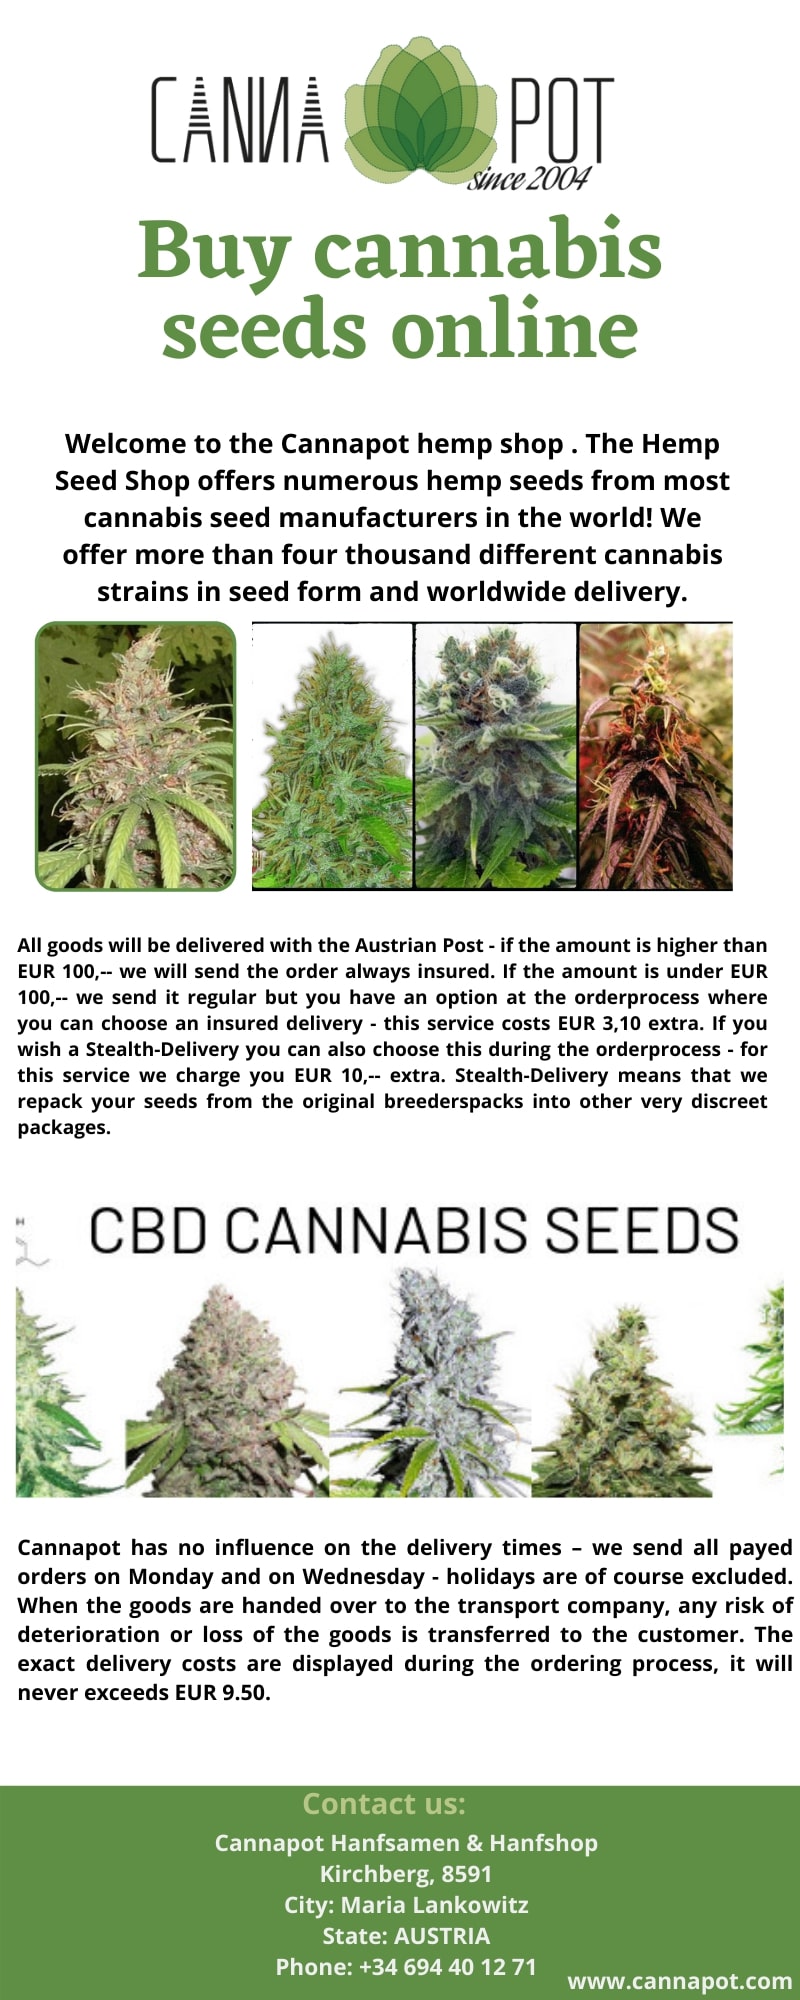 Buy Cannabis Seeds Online.jpg  by Cannapot